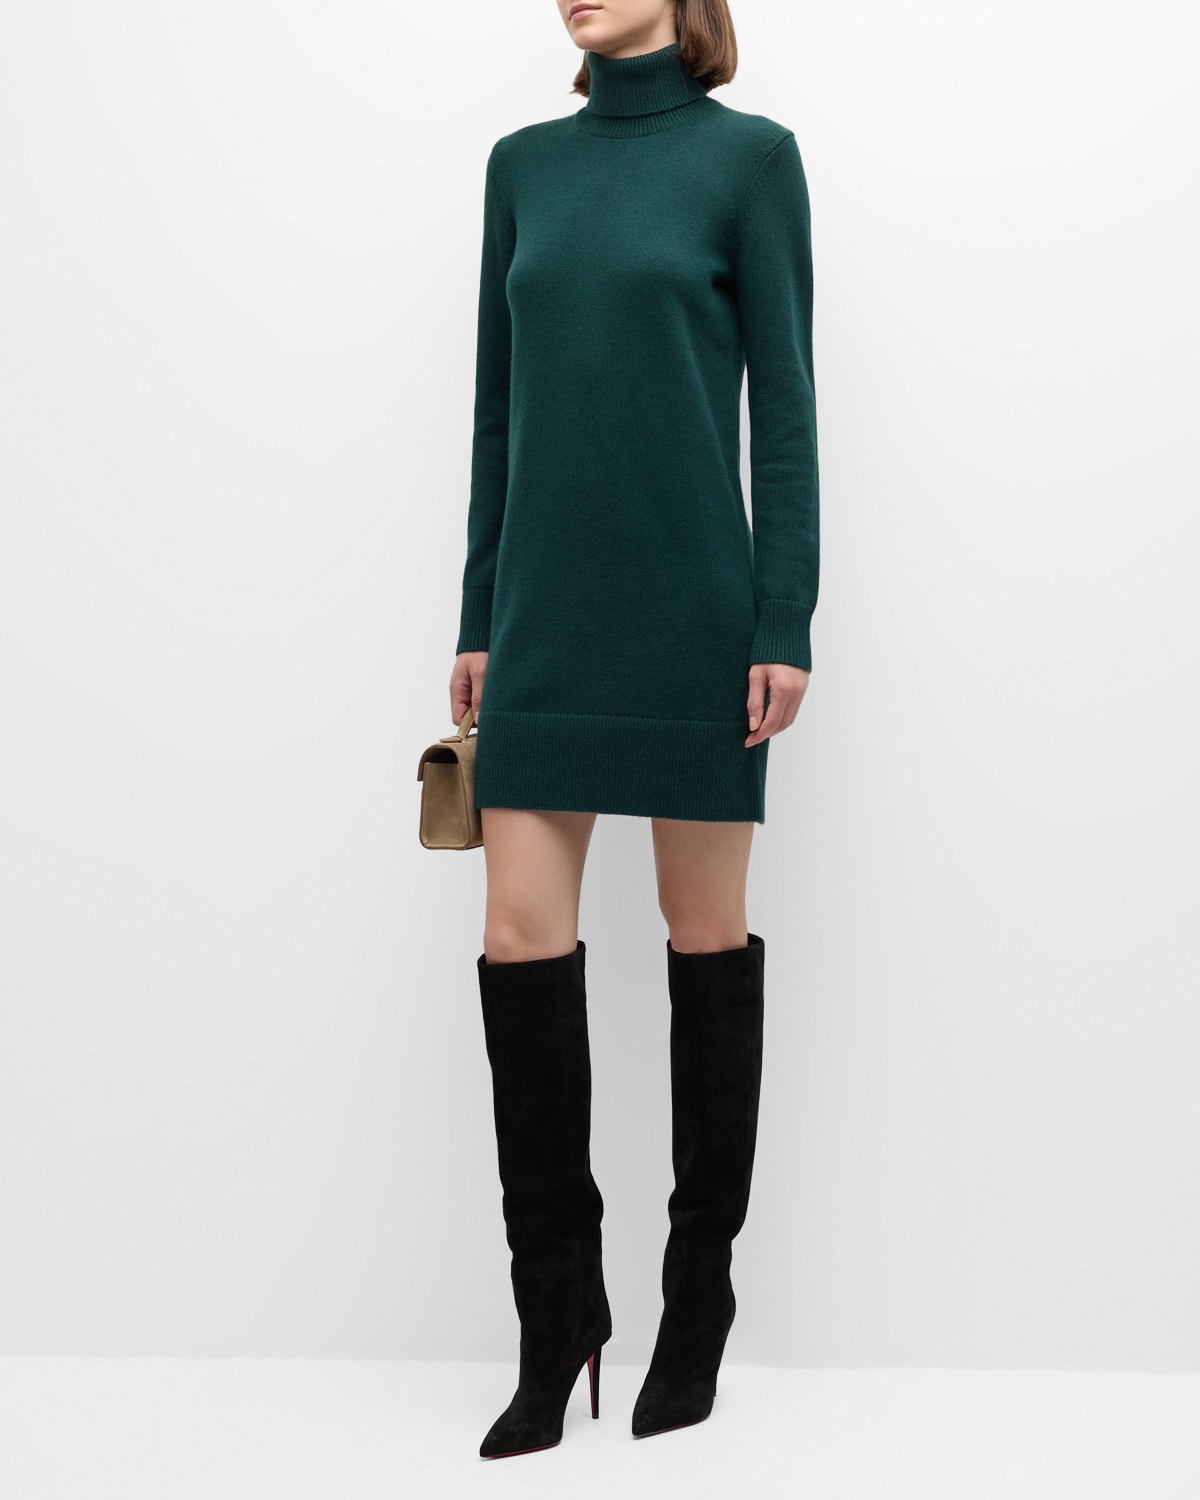 Michael Kors Kaia Cashmere Turtleneck Sweater Dress In Forest